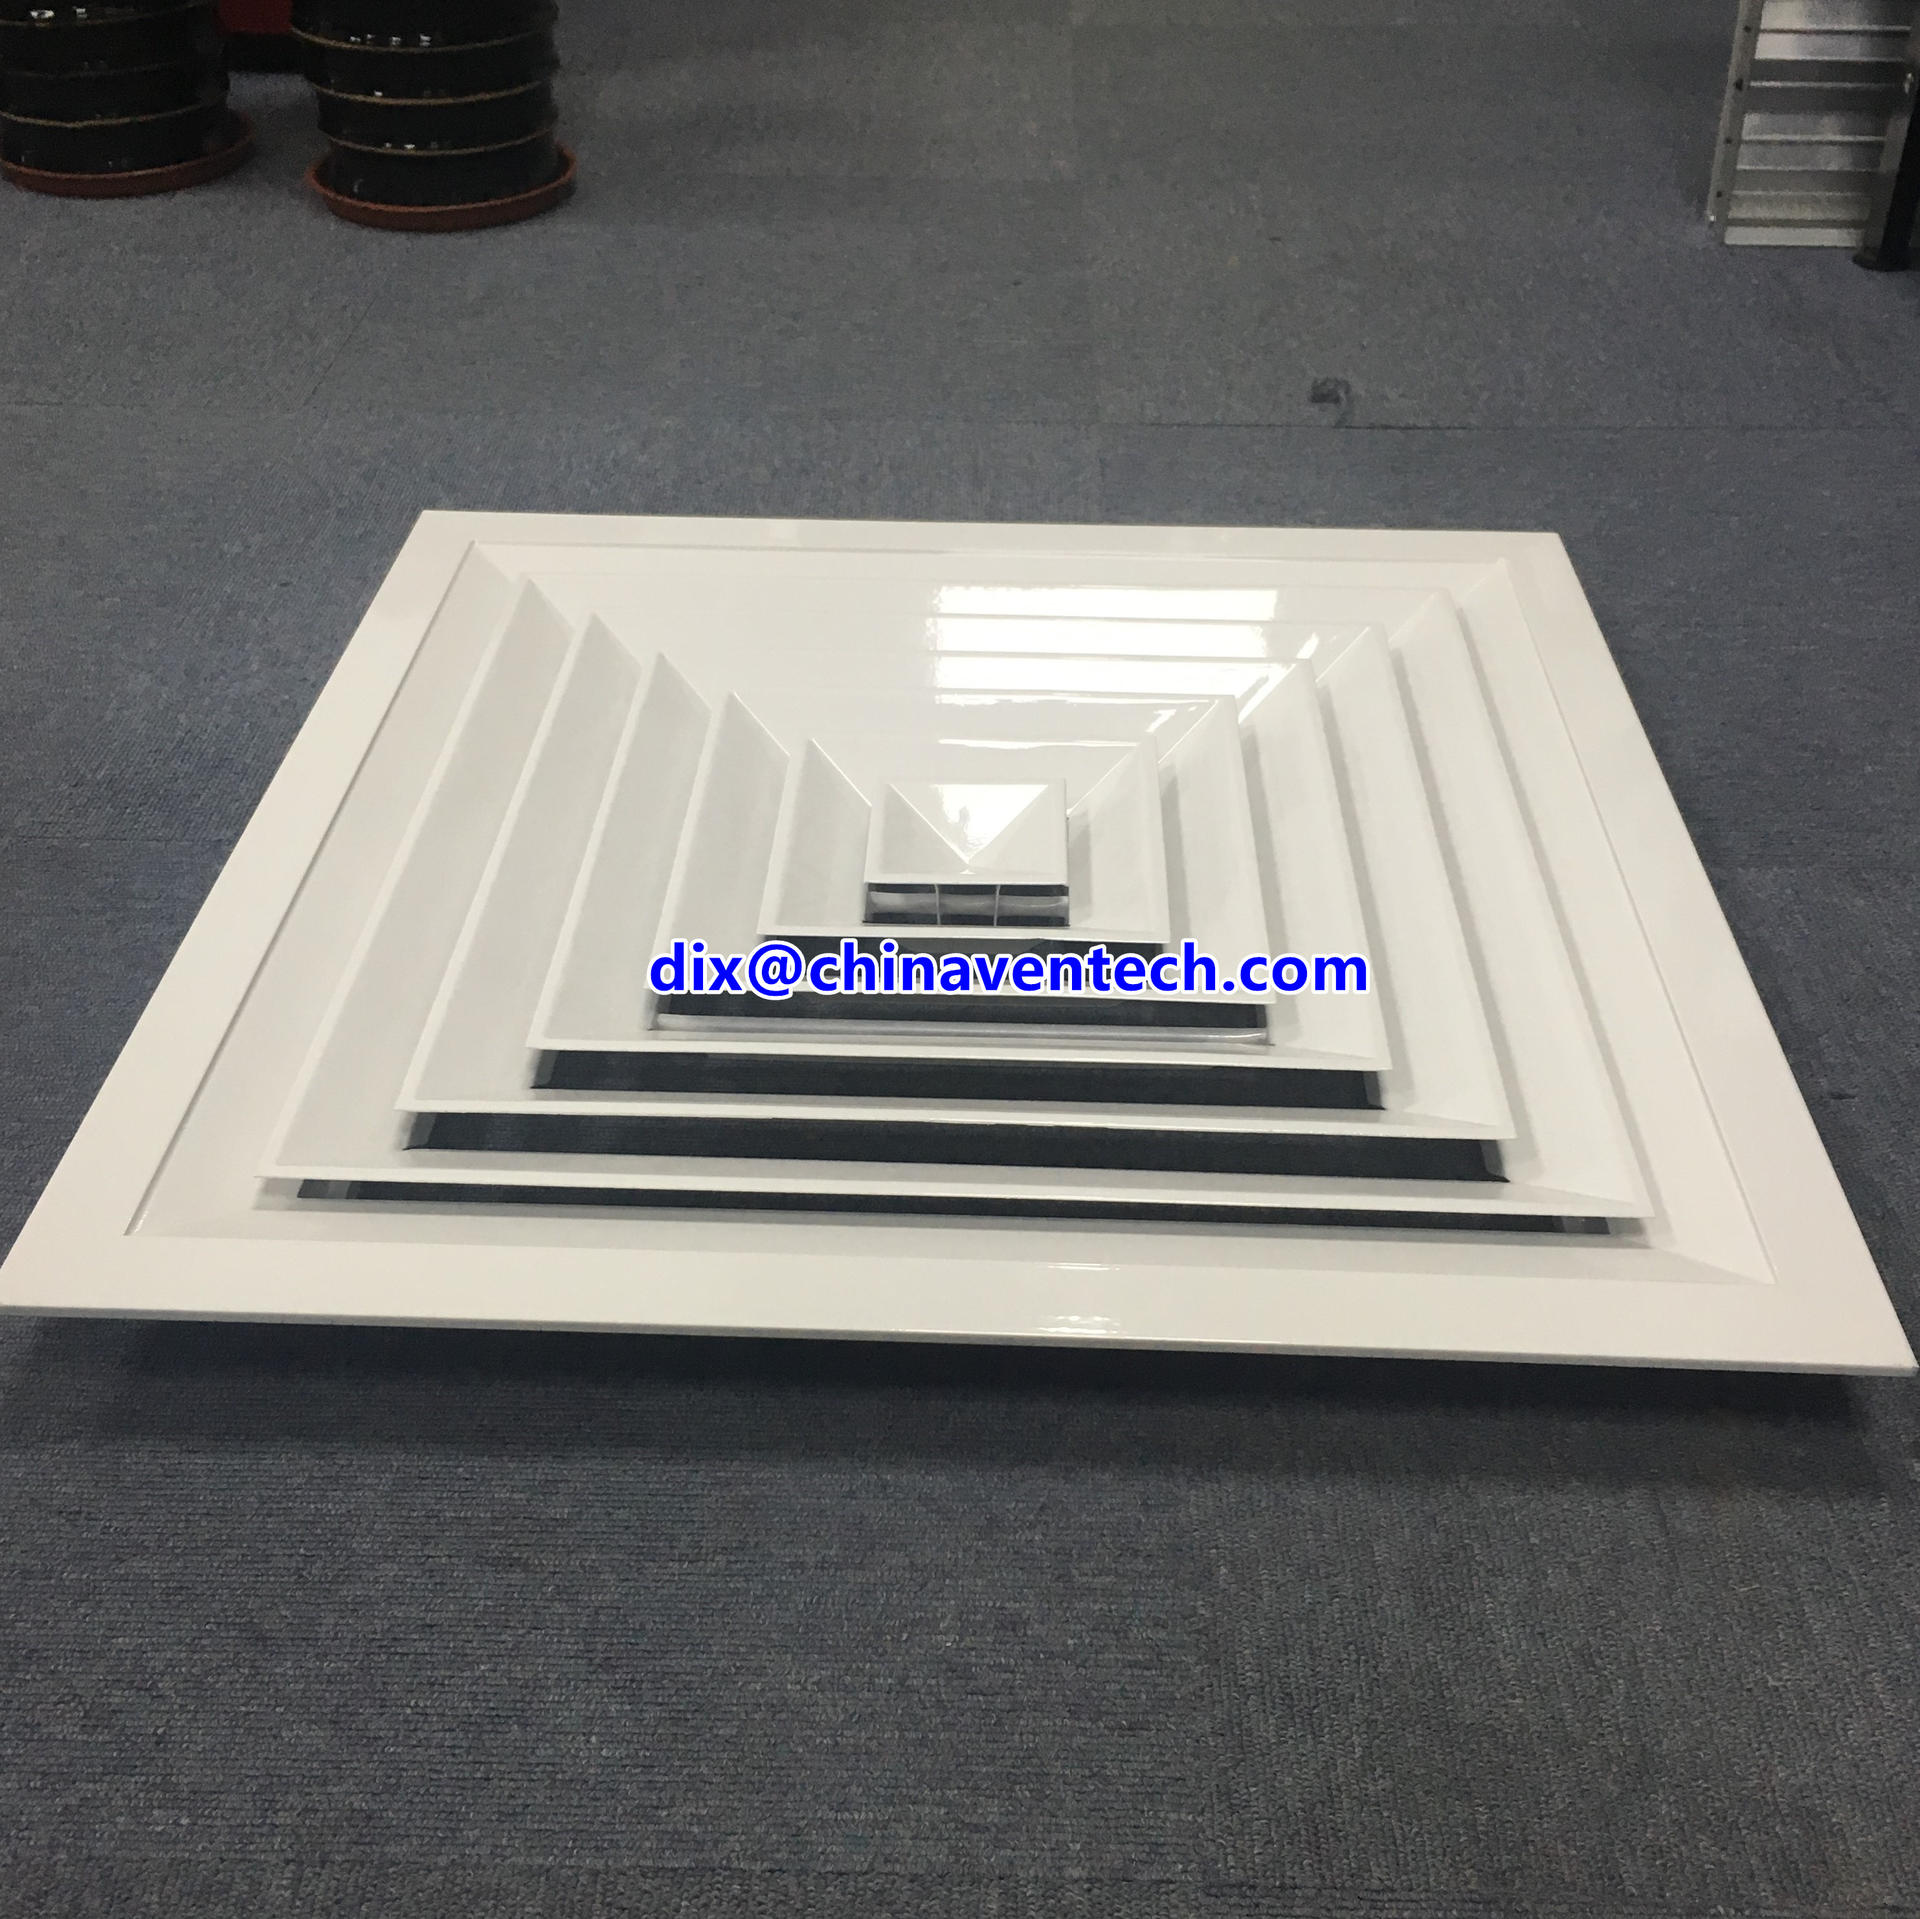 Hvac air conditioning systems adjustable air volume square ceiling 4 way diffuser